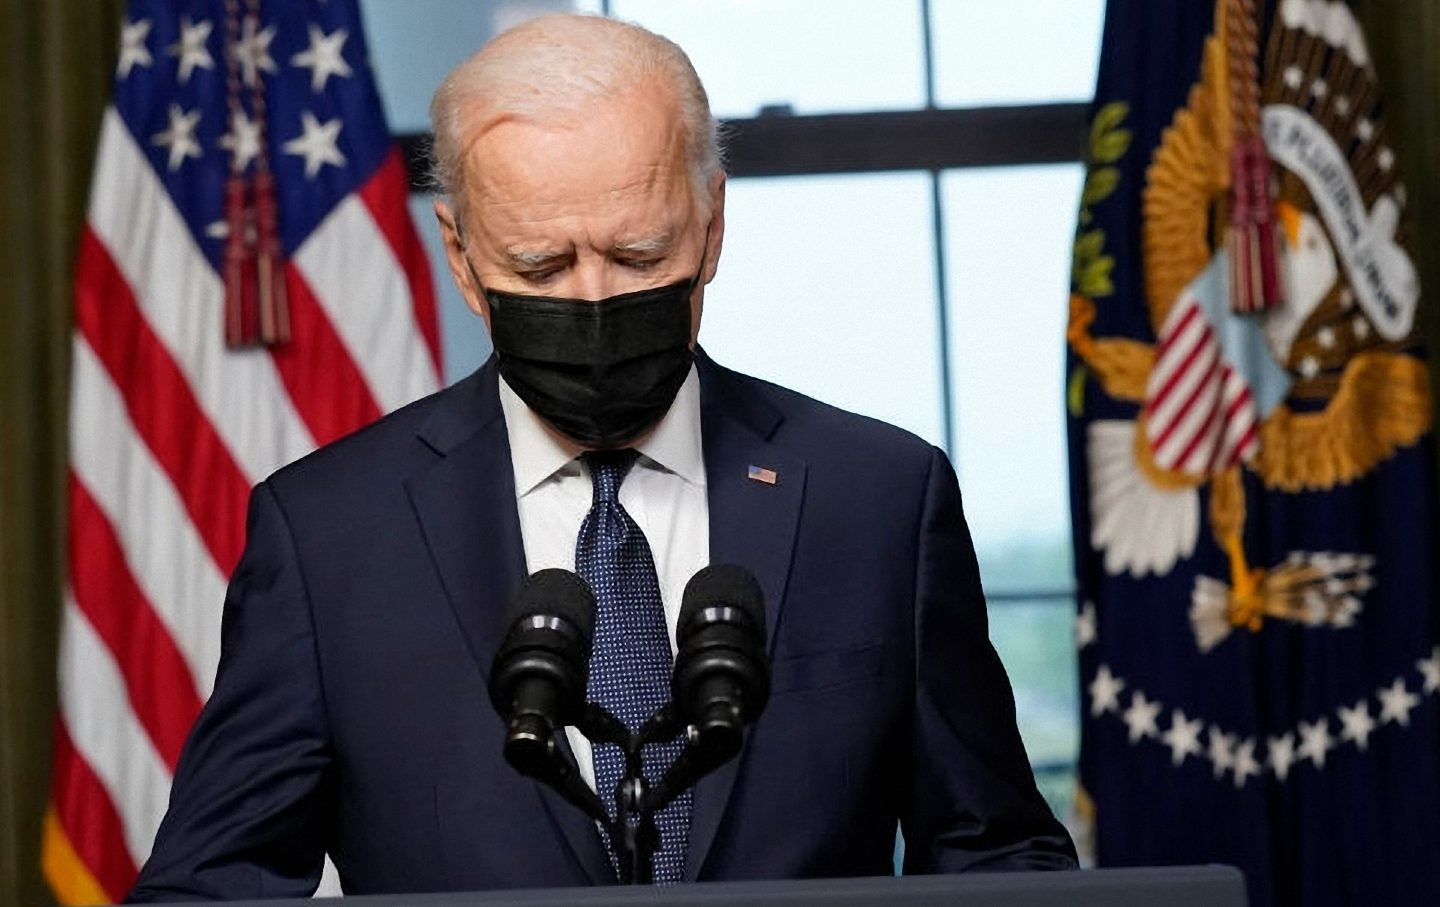 Washington Watch: Biden and Harris Dive Into the Shark-Infested Waters of Bipartisanship